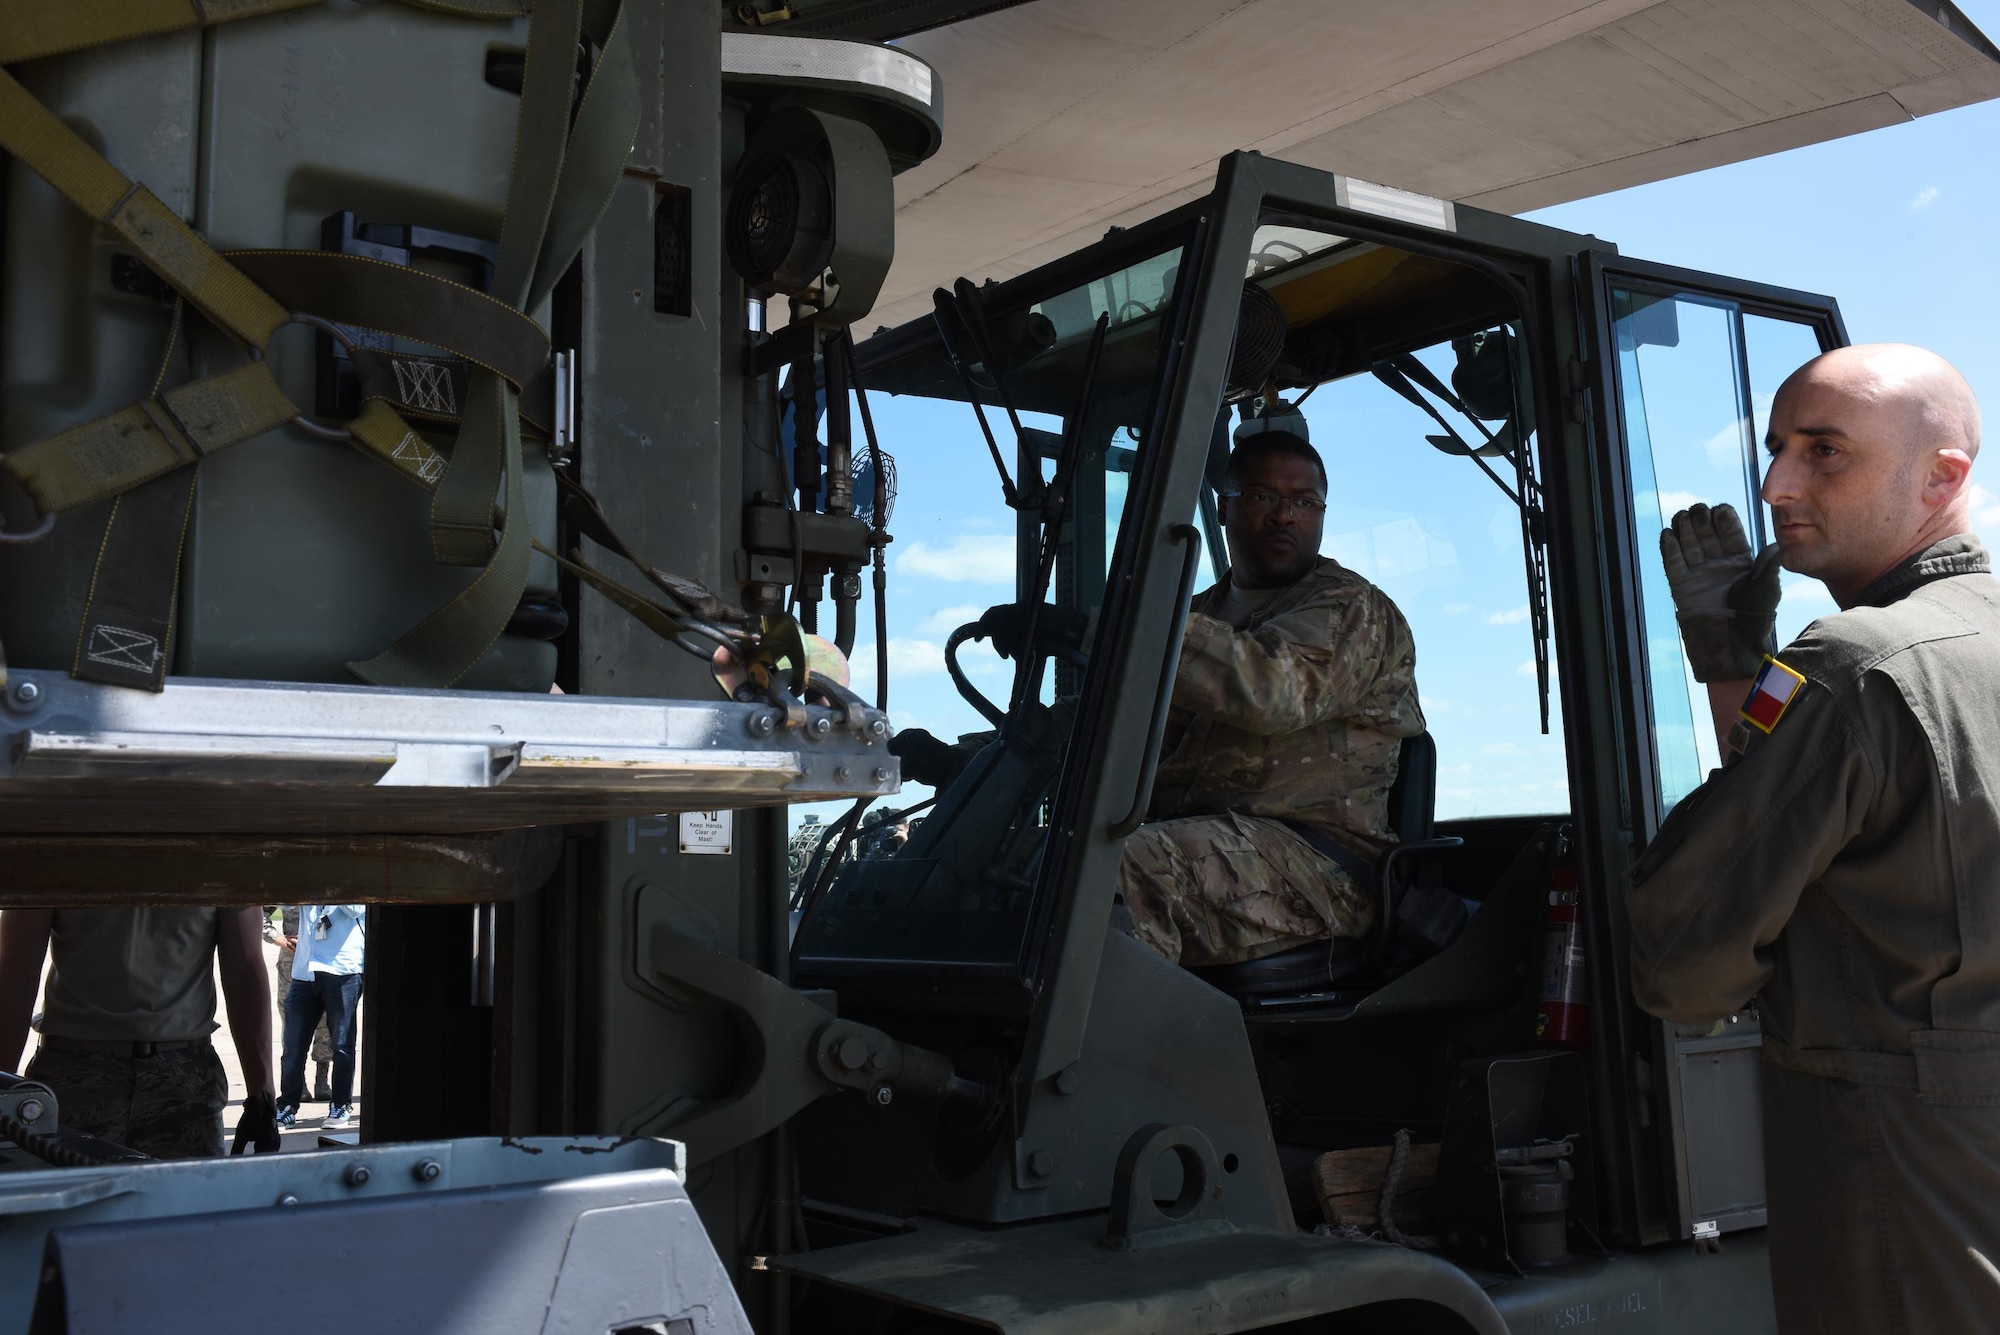 Senior Master Sgt. Alquintin Steele, 137 SOLRS deployment and distribution superintendent from Will Rogers Air National Guard Base in Oklahoma City, receives direction from a loadmaster from the 136th Airlift Wing, located at Naval Air Station Fort Worth Joint Reserve Base at Carswell Field, Texas, while loading a pallet of medical equipment and supplies onto a C-130 Hercules from the 136 AW, Aug. 28, 2017, at Will Rogers Air National Guard Base. The 137th Special Operations Wing deployed nearly 40 medical and aeromedical evacuation Airmen and equipment in support of the Texas Military Department and their relief efforts following Hurricane Harvey. (U.S. Air National Guard photo by Staff Sgt. Kasey Phipps/Released)